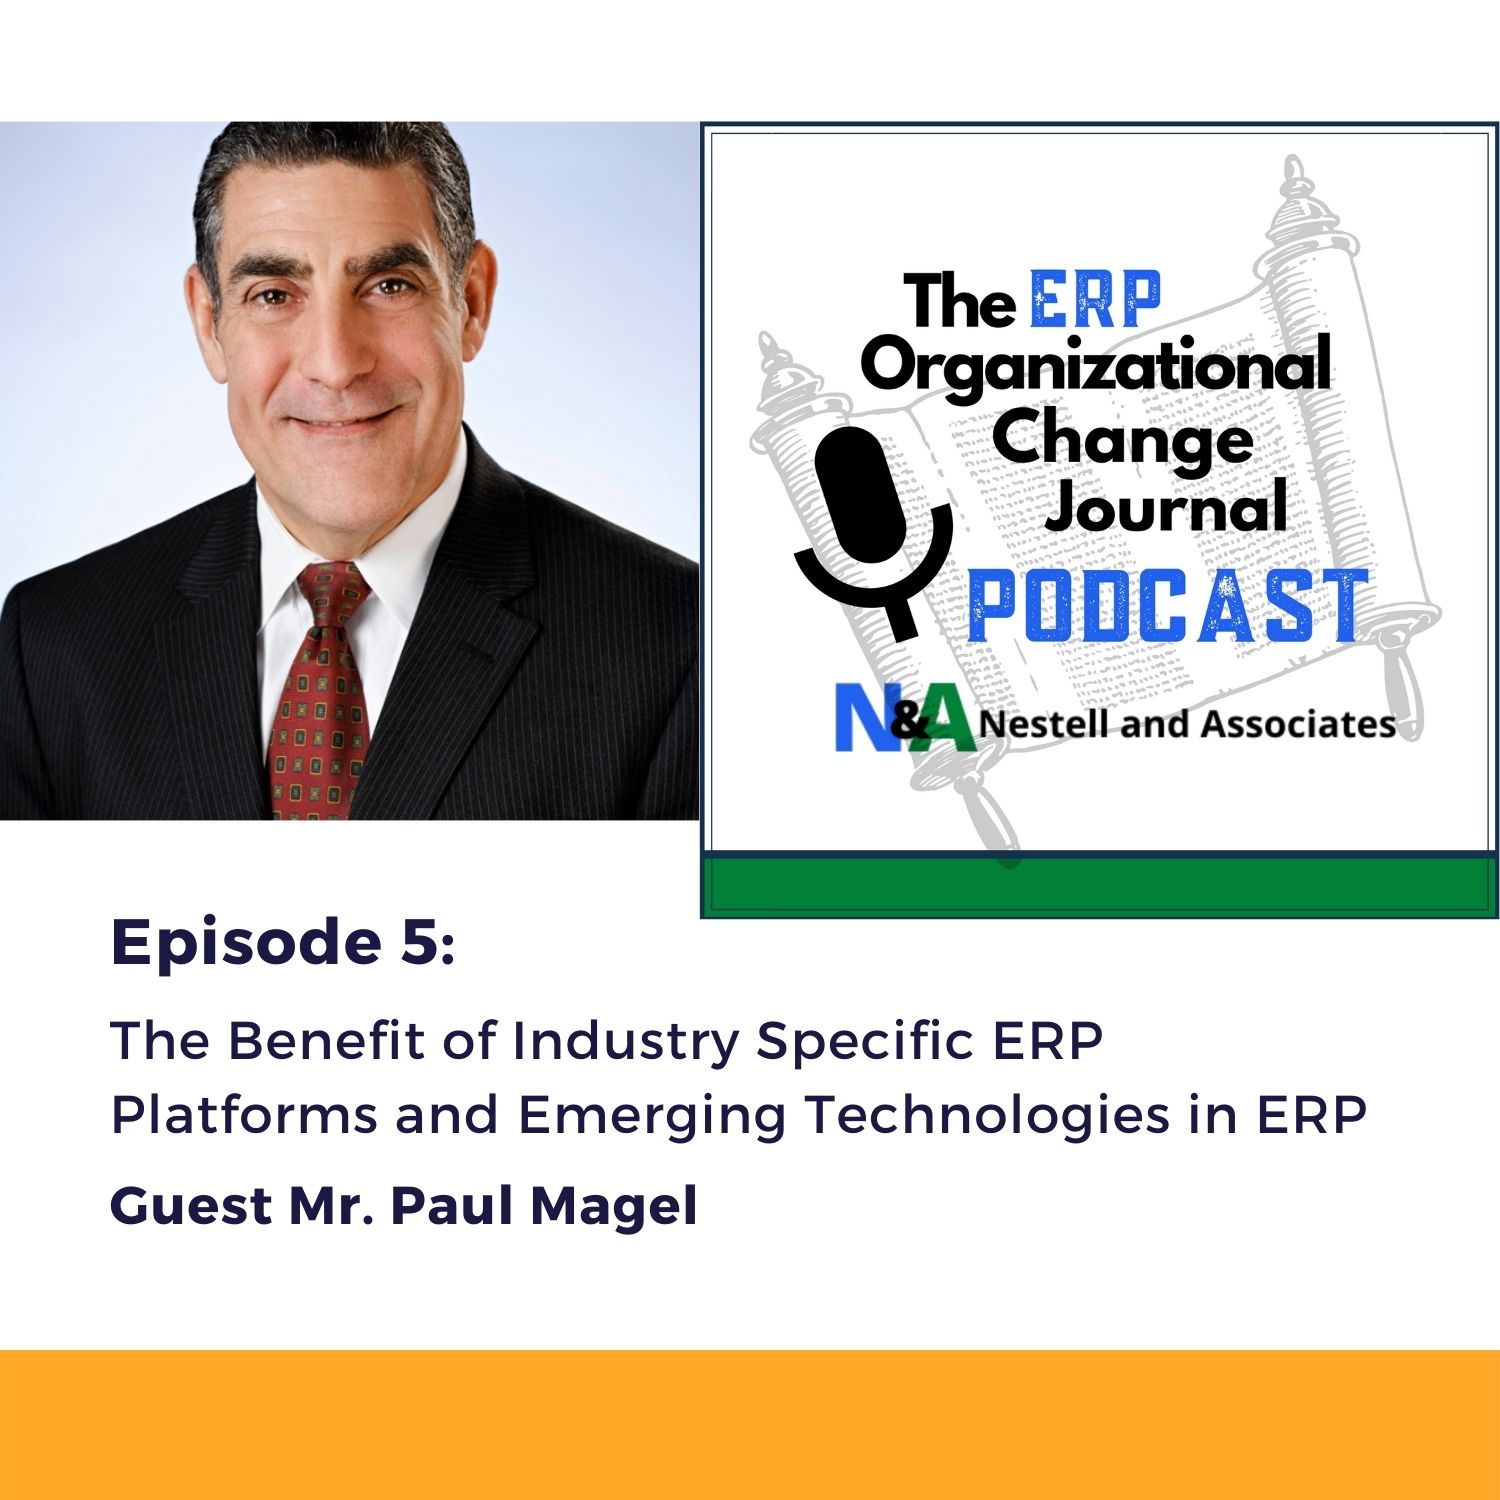 Episode 5 The Benefit of Industry Specific ERP Platforms and Emerging Technologies in ERP Guest Mr. Paul Magel